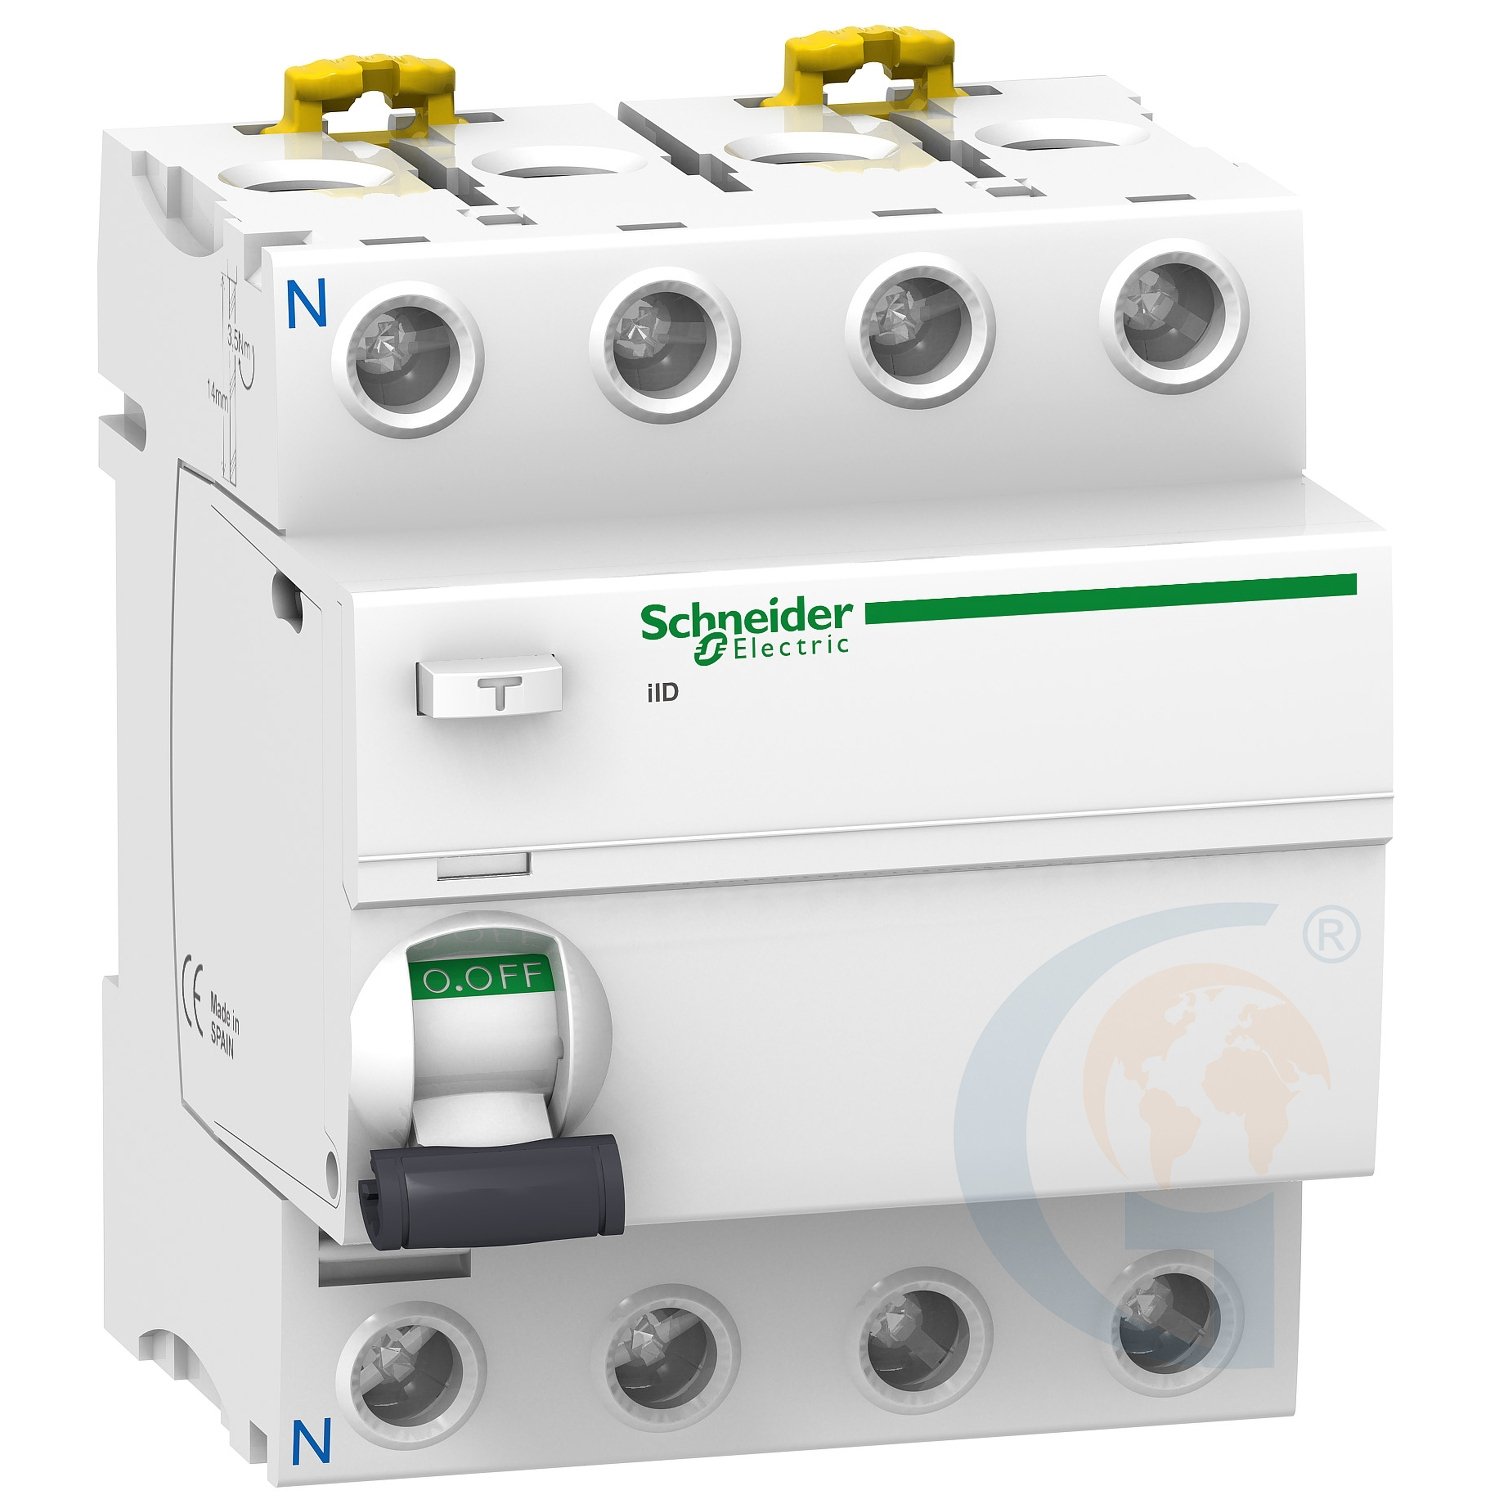 Schneider Electric A9R31425 ACTI 9 IID – RCCB – 4P – 25A – 30MA – TYPE A-SI https://gesrepair.com/wp-content/uploads/2020/Schneider/Schneider_Electric_A9R31425_.jpg